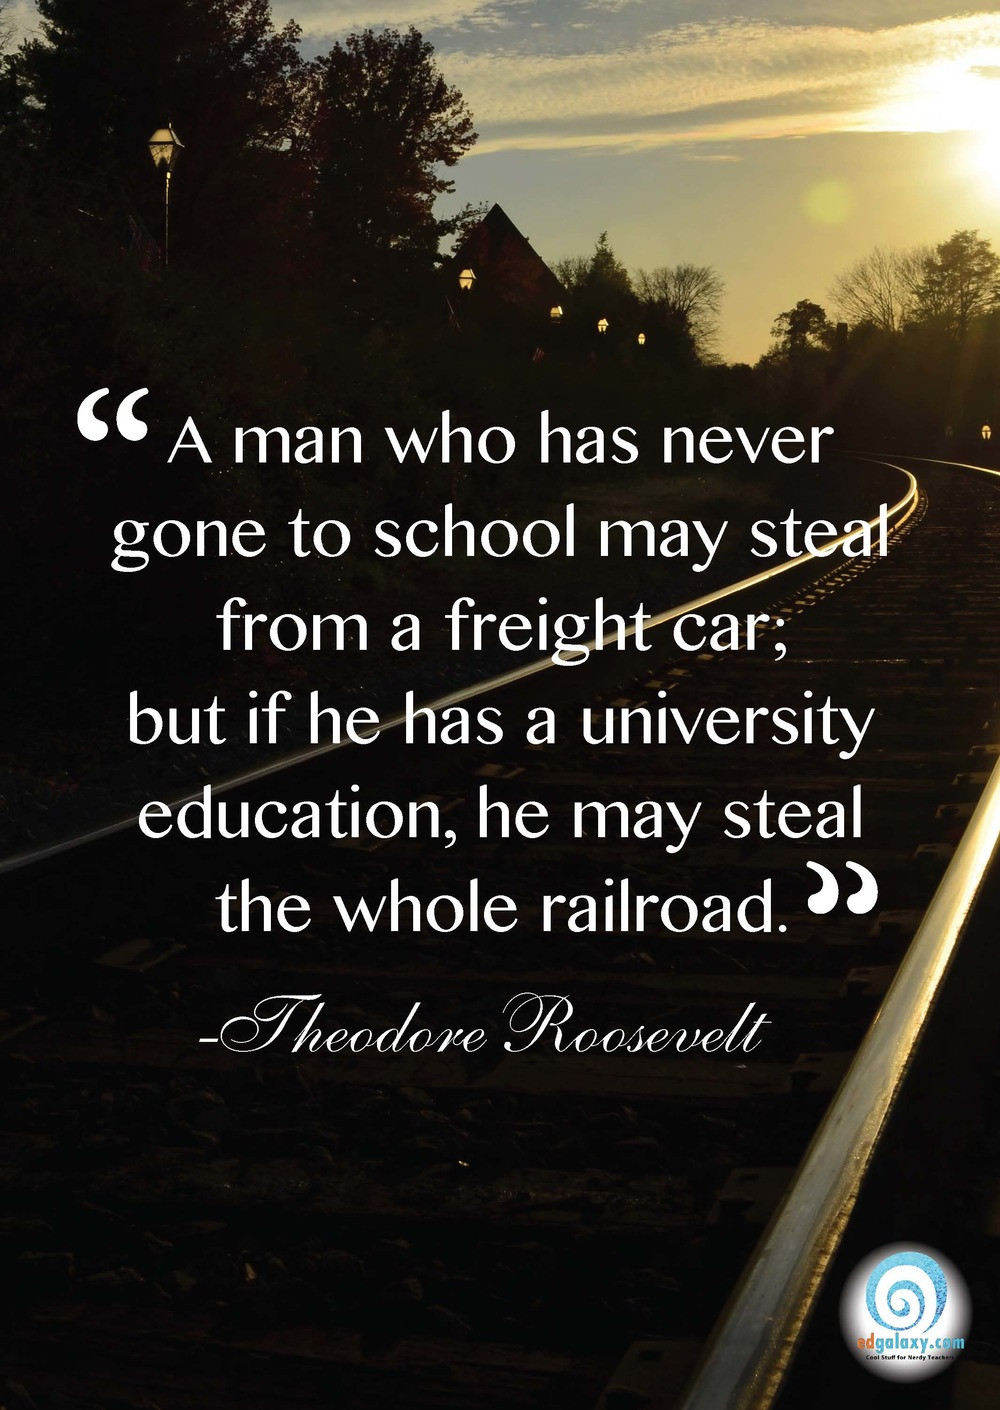 Inspiring Quote About Education
 Education Quotes Famous Quotes for teachers and Students